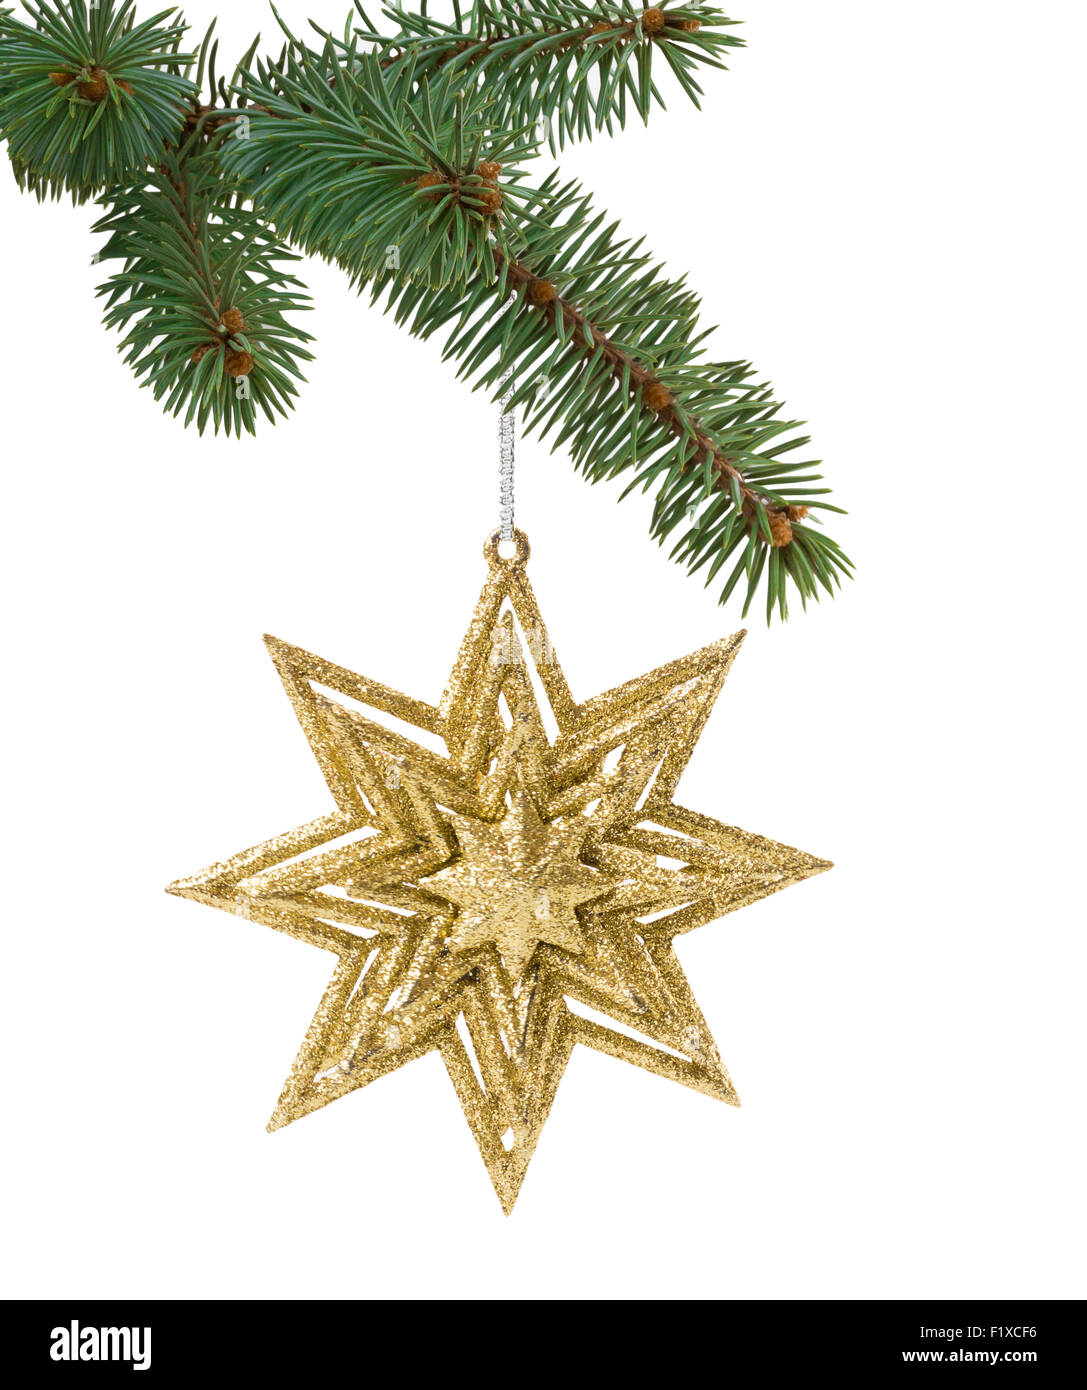 Christmas toy in the shape of a star on a branch. Stock Photo